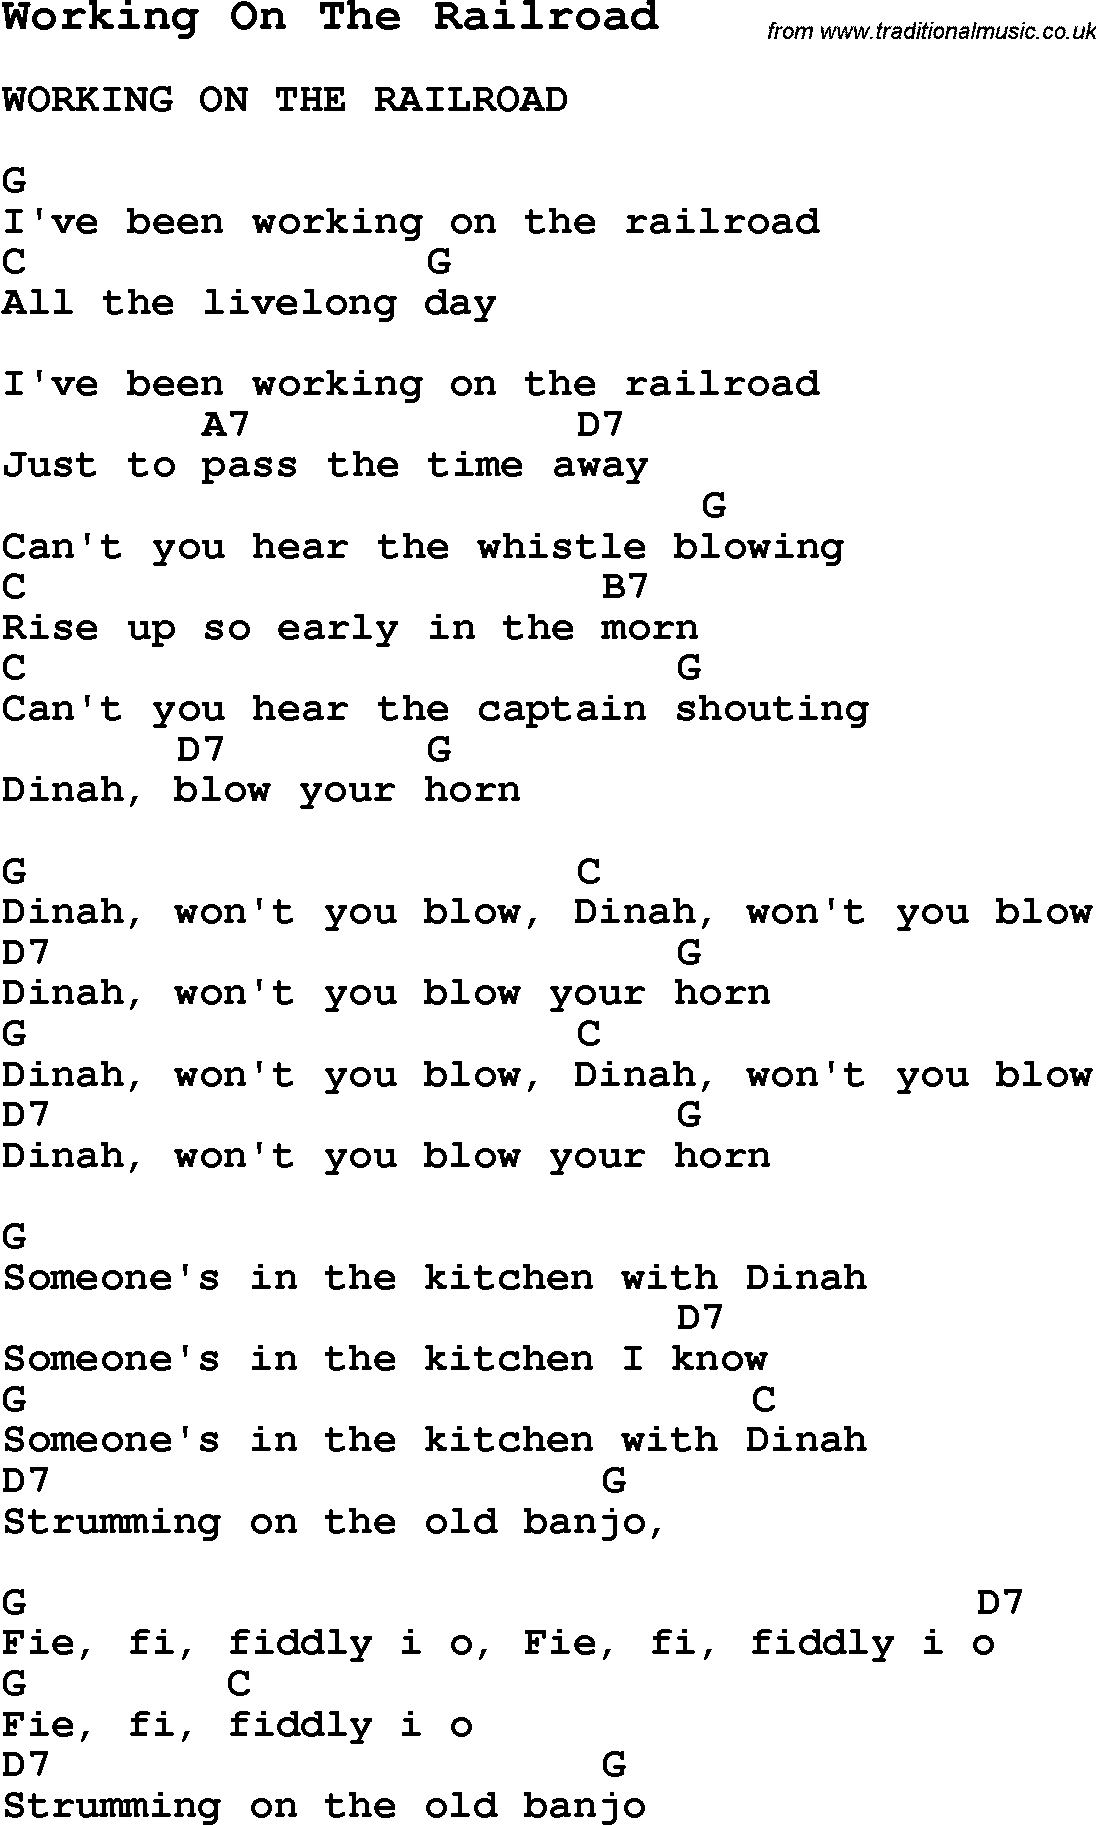 Summer-Camp Song, Working On The Railroad, with lyrics and chords for Ukulele, Guitar Banjo etc.